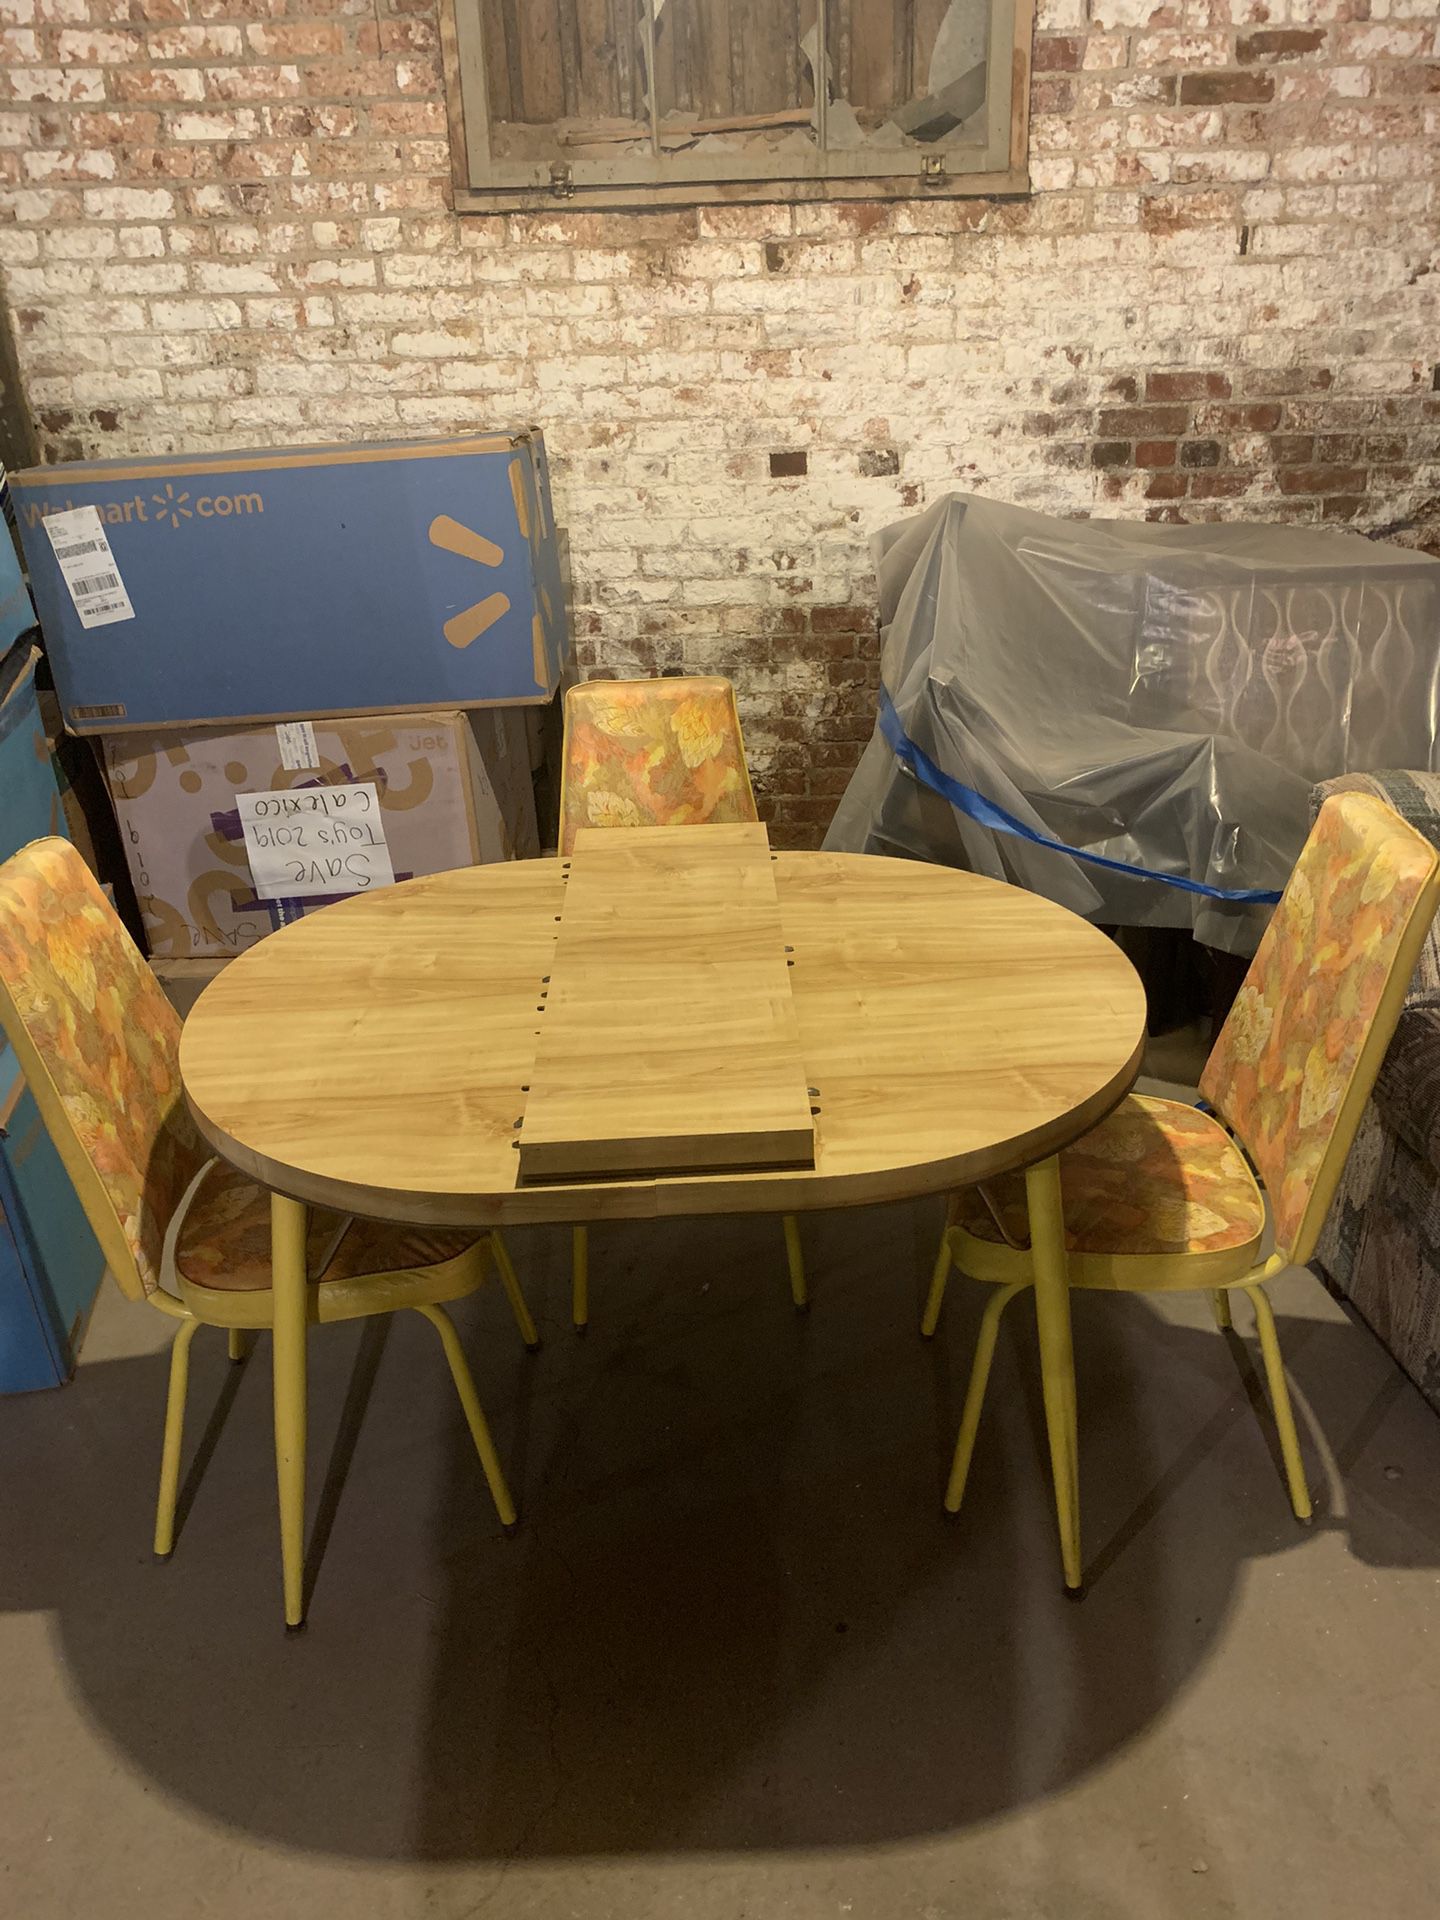 Vintage Retro Douglas Furniture Co. Yellow Dinner Table with Extender and 3 chairs Dinnete Set